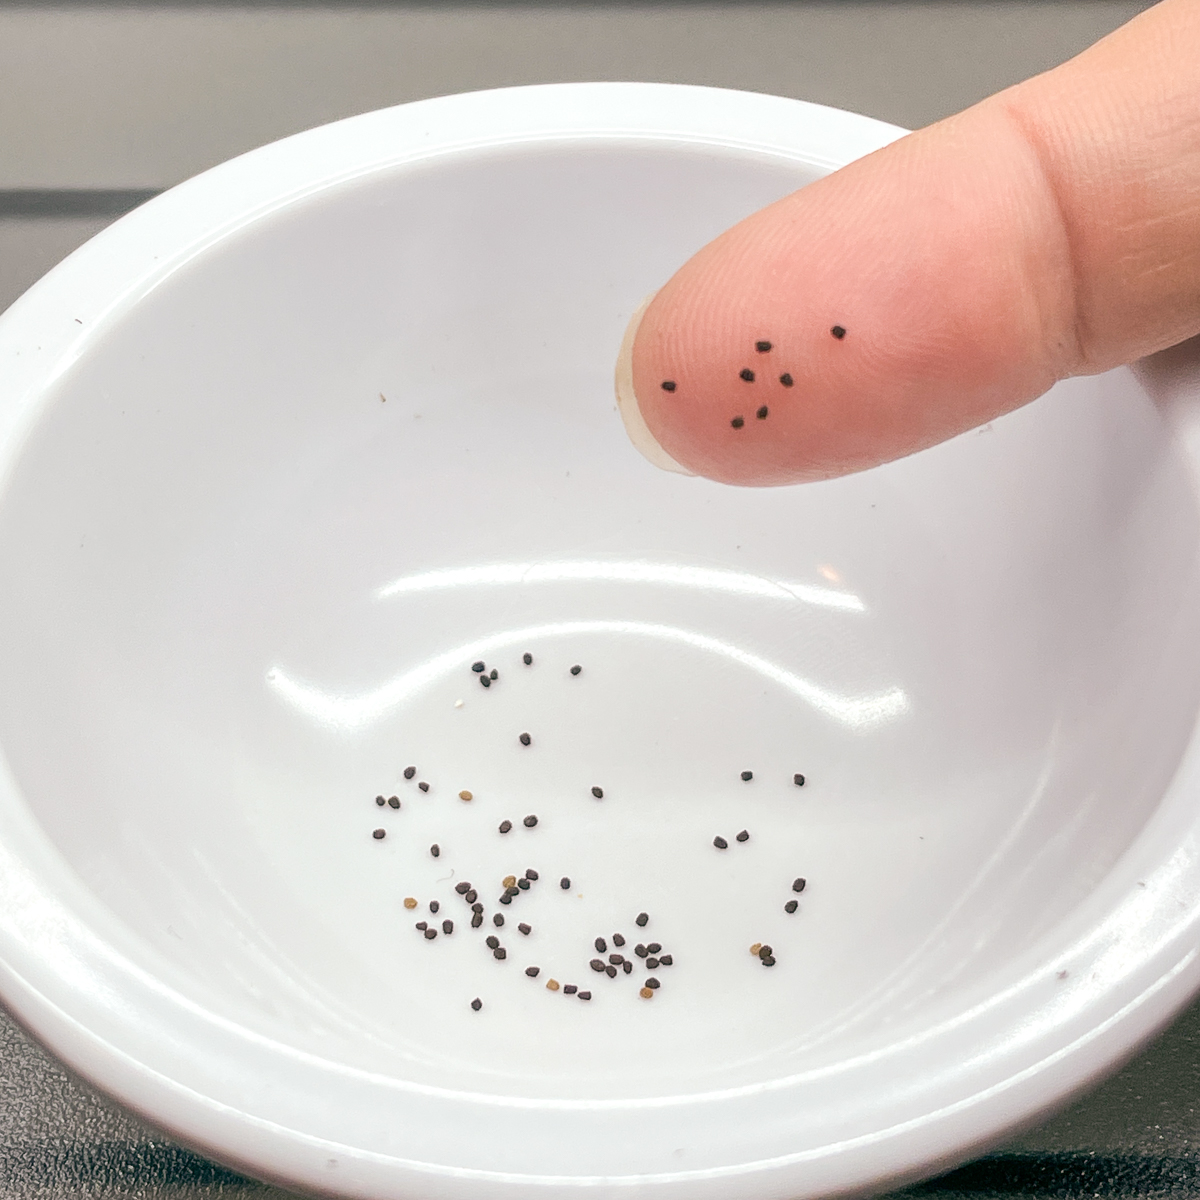 snapdragon seeds in small bowl with some stuck to finger